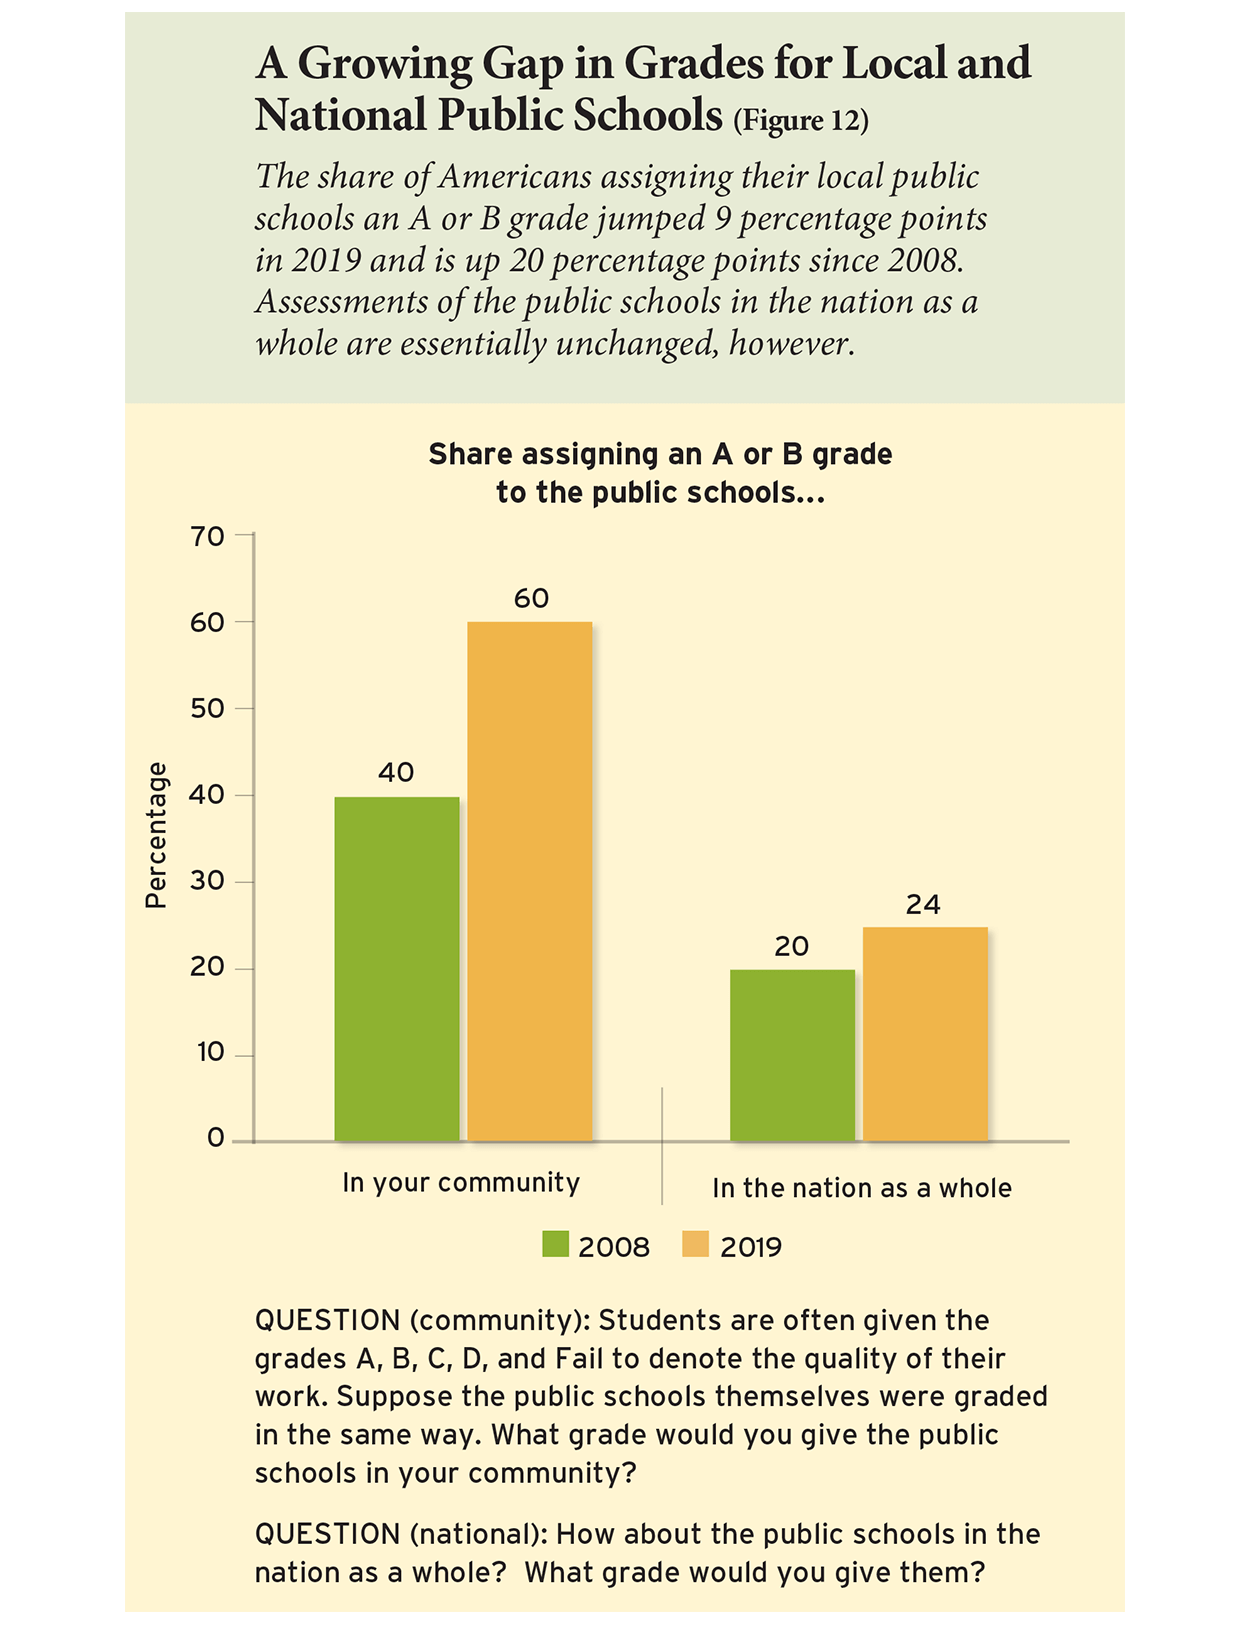 A Growing Gap in Grades for Local and National Public Schools (Figure 12)